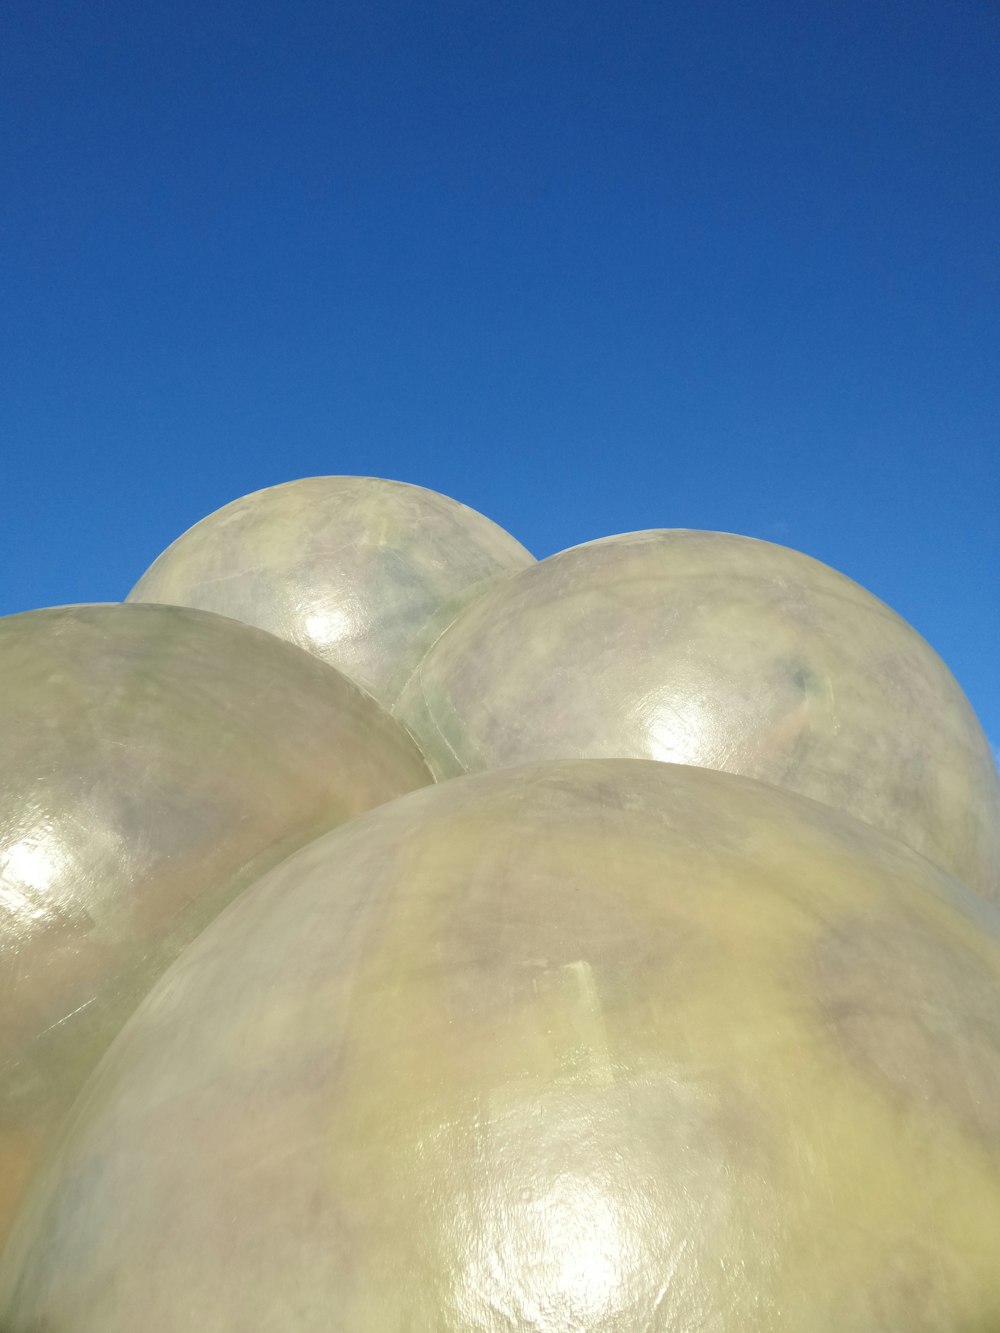 a group of large white balls sitting on top of each other